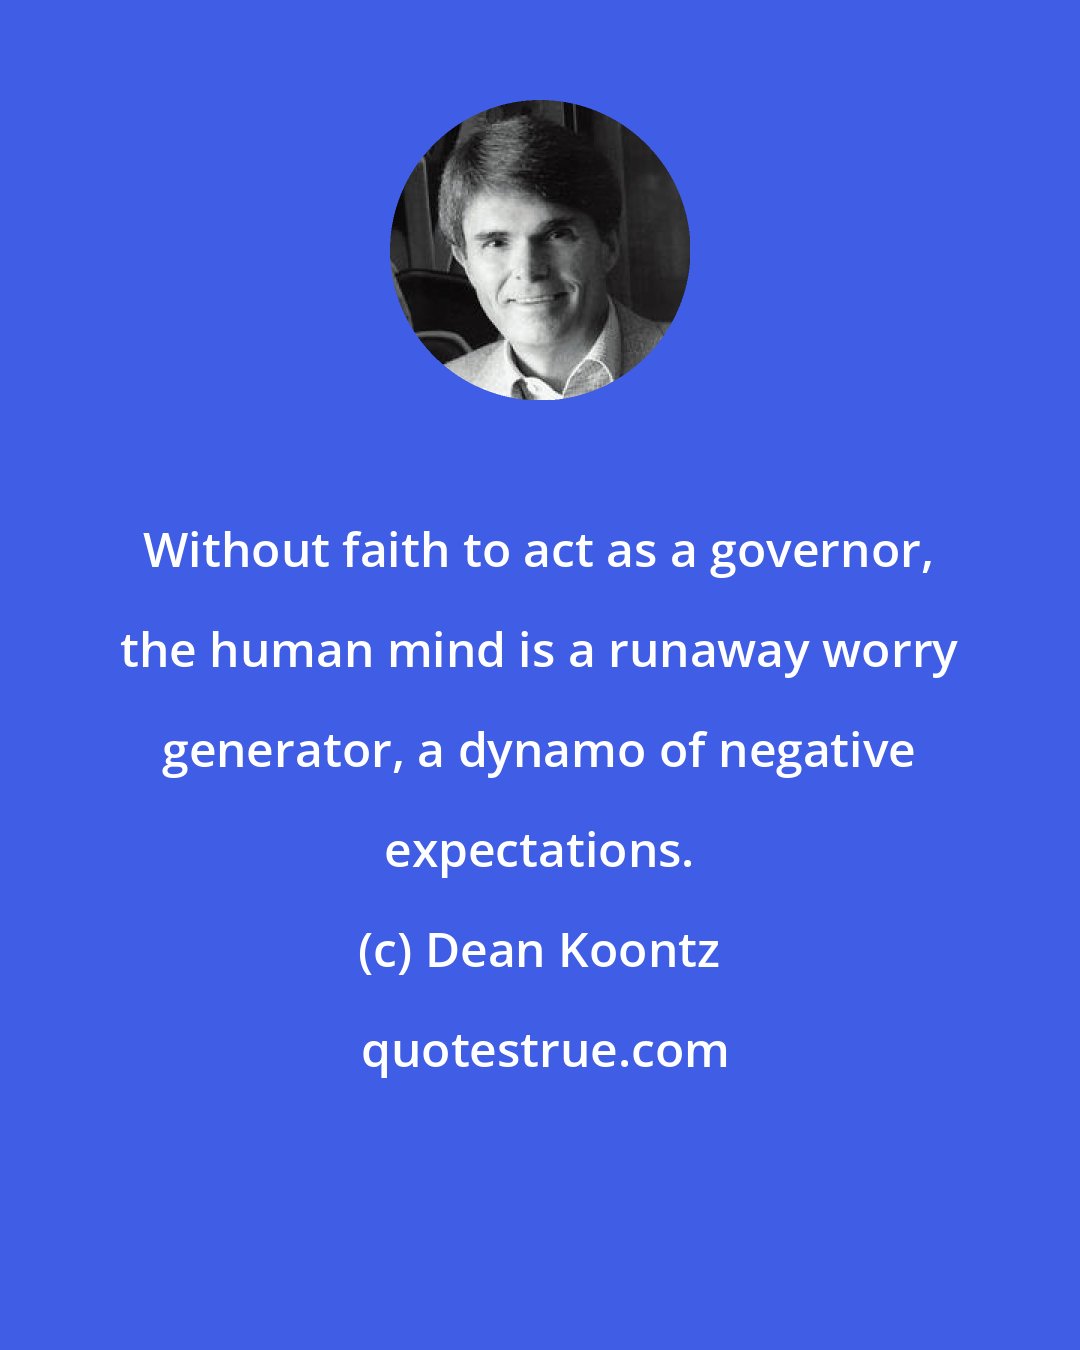 Dean Koontz: Without faith to act as a governor, the human mind is a runaway worry generator, a dynamo of negative expectations.